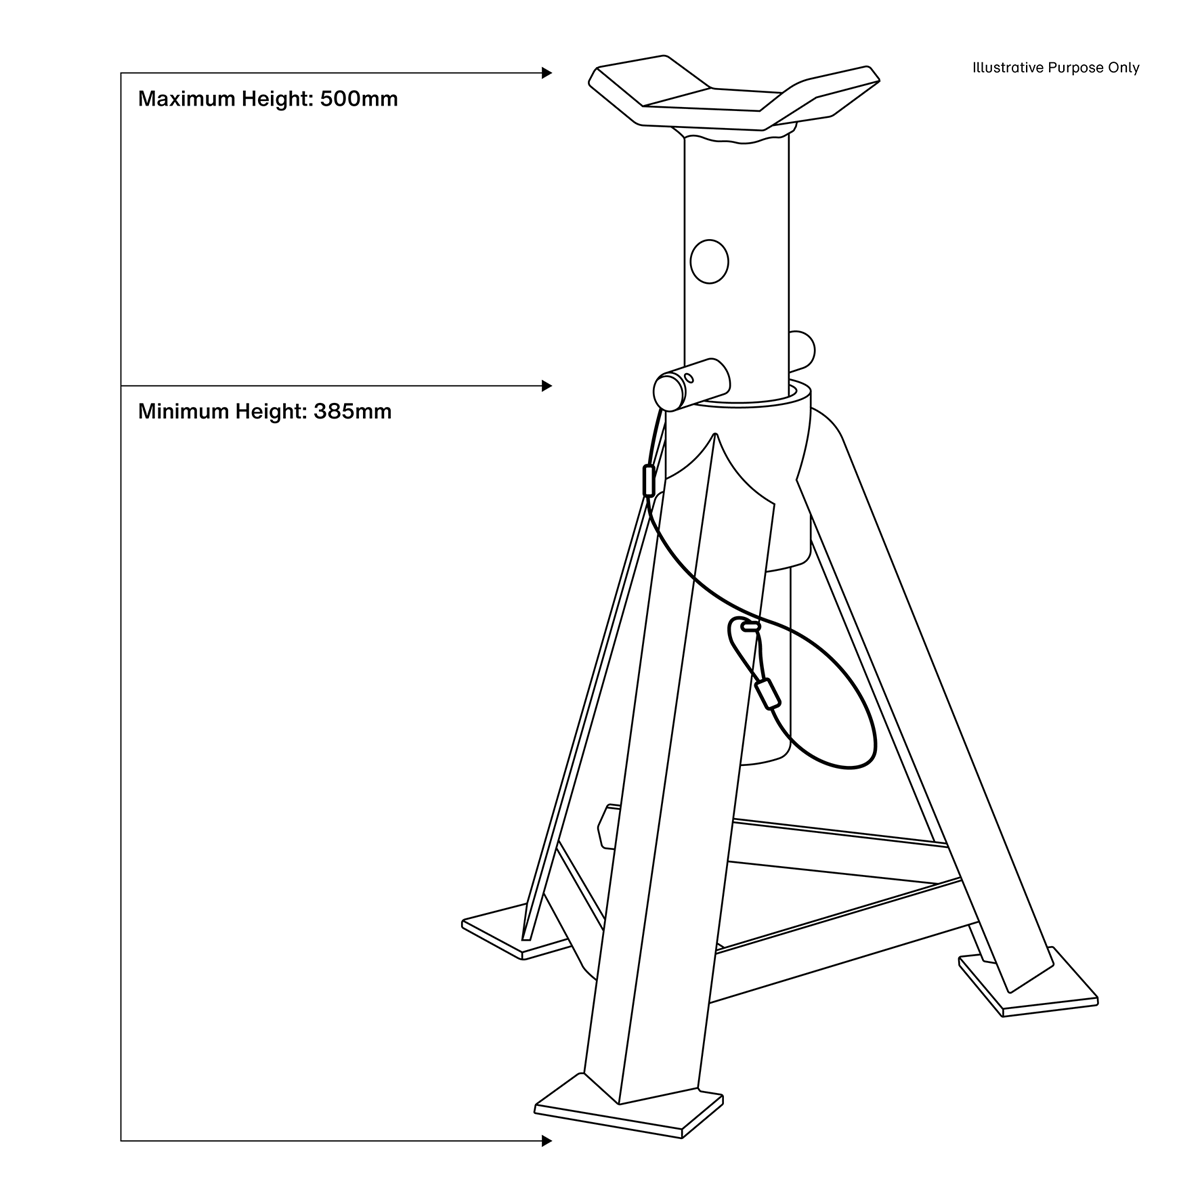 Sealey Axle Stands (Pair) 5 Tonne Capacity per Stand diagram AS5000